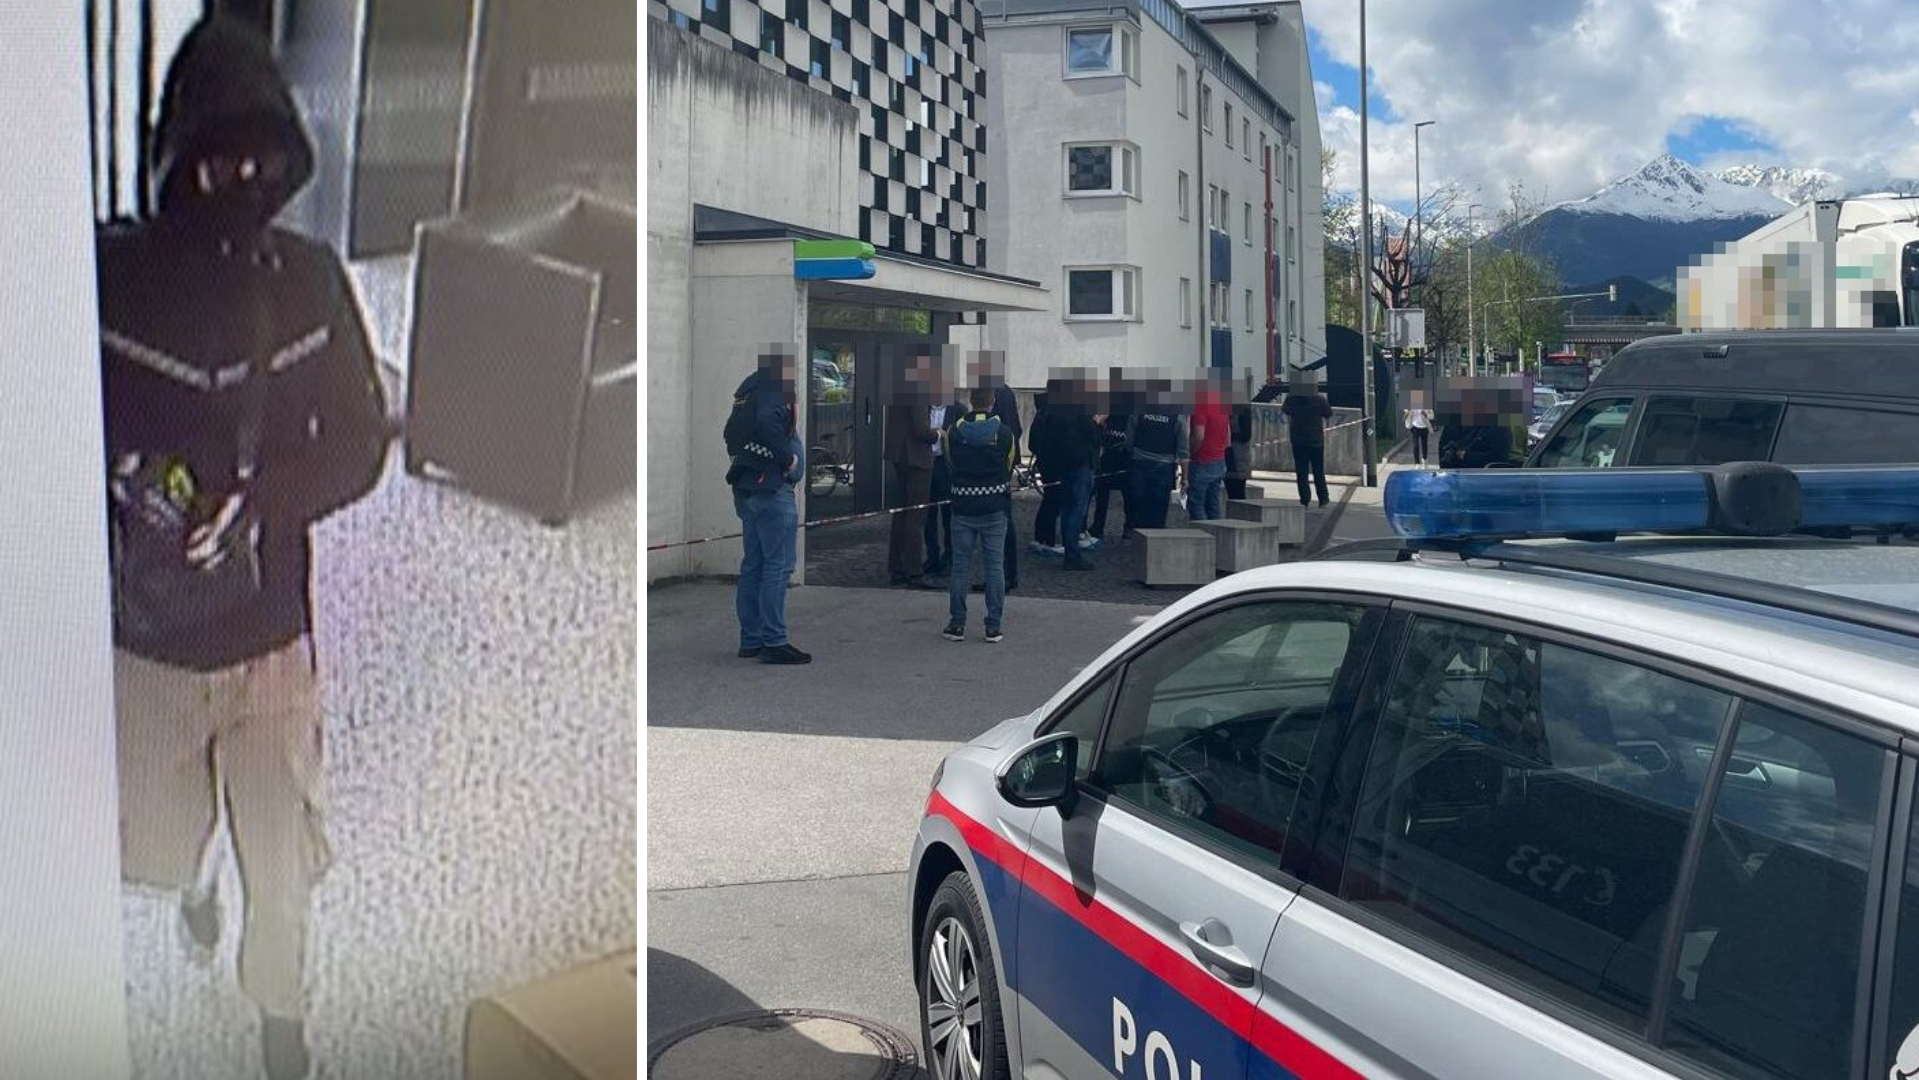 Late Tuesday morning, the BTV branch on Mitterweg in Innsbruck was robbed by an unknown person. (Bild: Polizei, Markus Gassler)